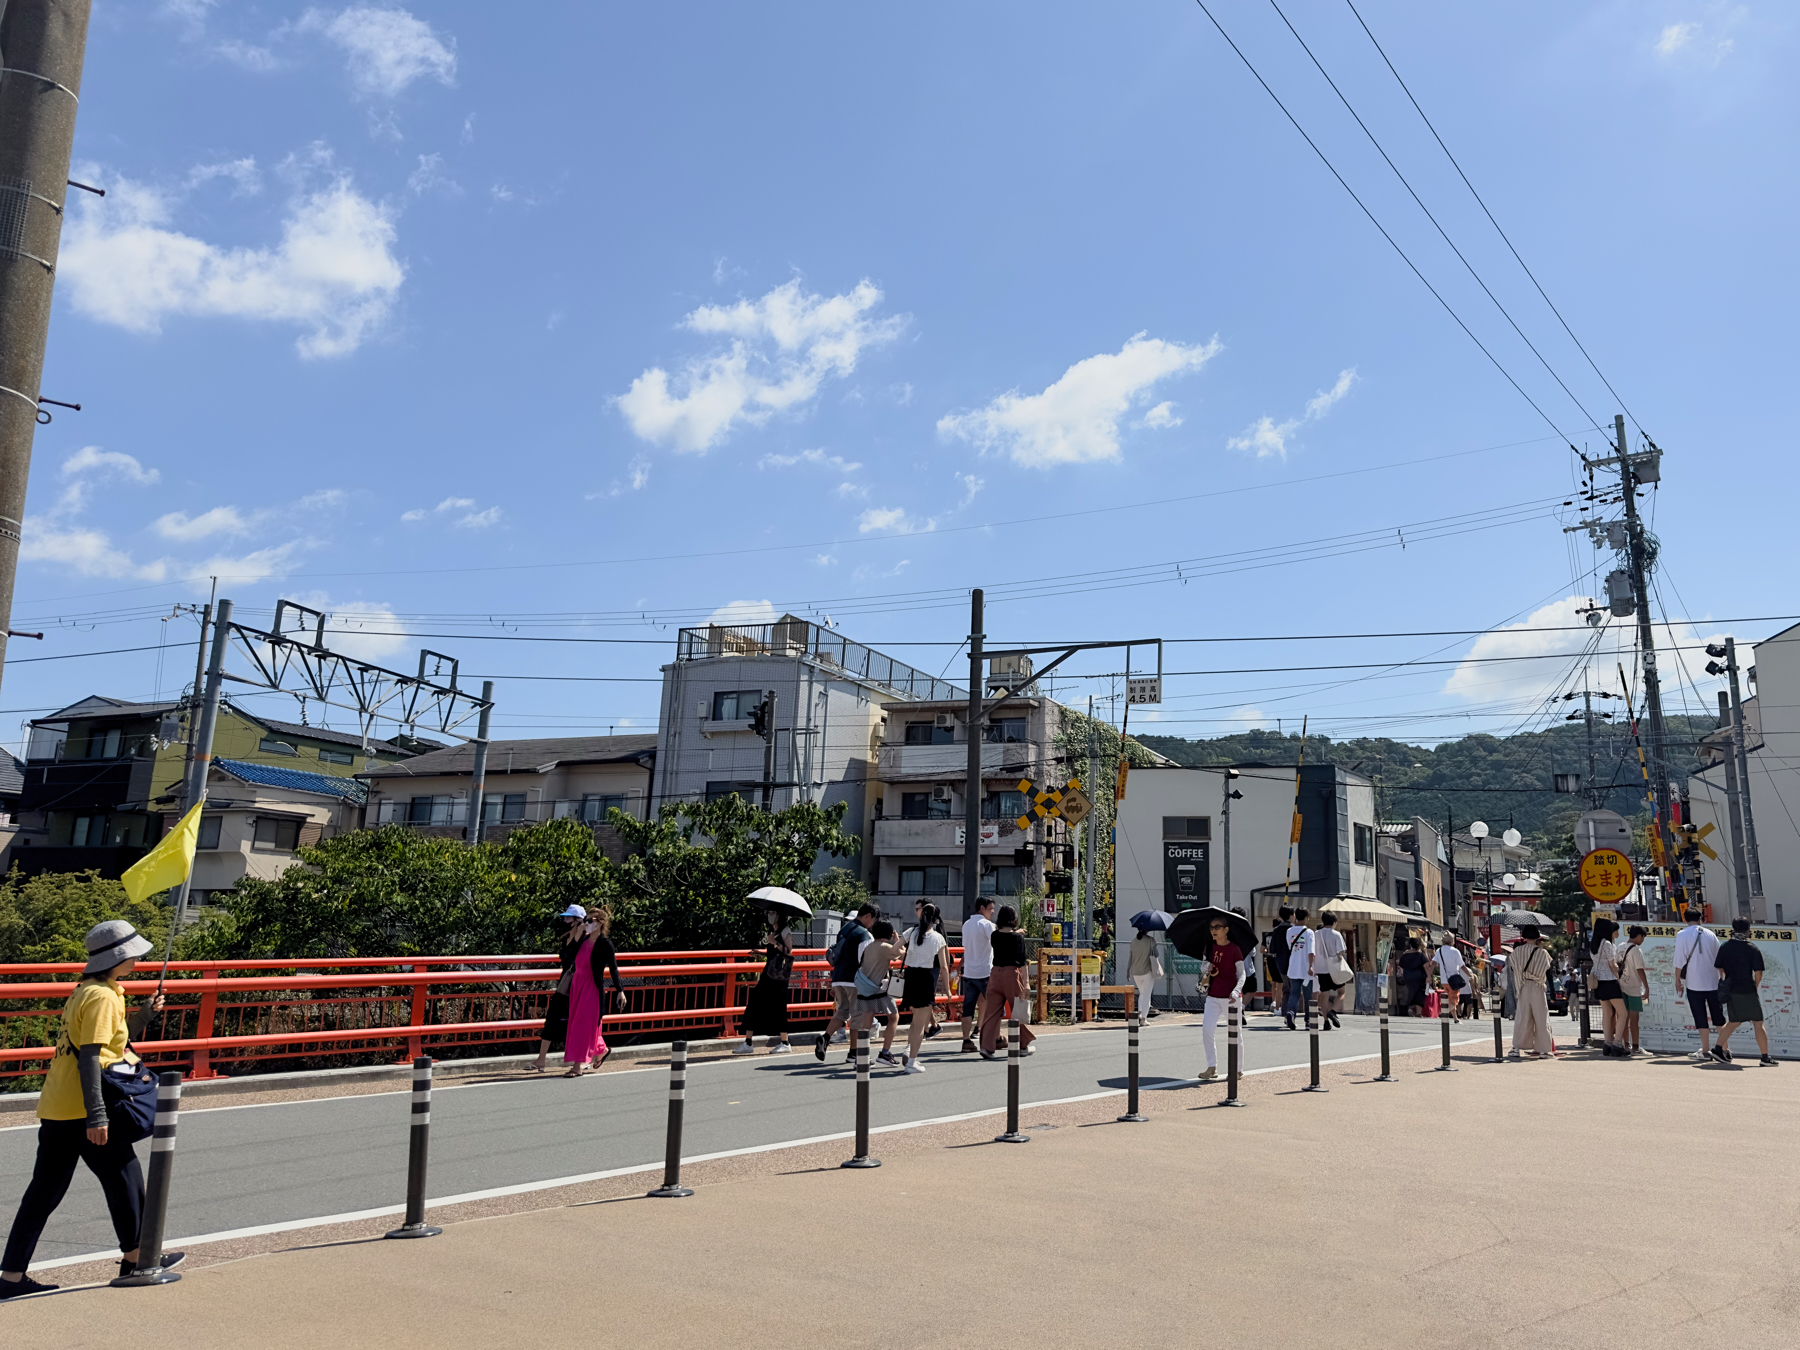 A bustling street scene with pedestrians, some holding umbrellas for shade, walking along a sidewalk with a red railing. There are buildings in the backdrop under a blue sky with scattered clouds. Utility poles and power lines are also visible.